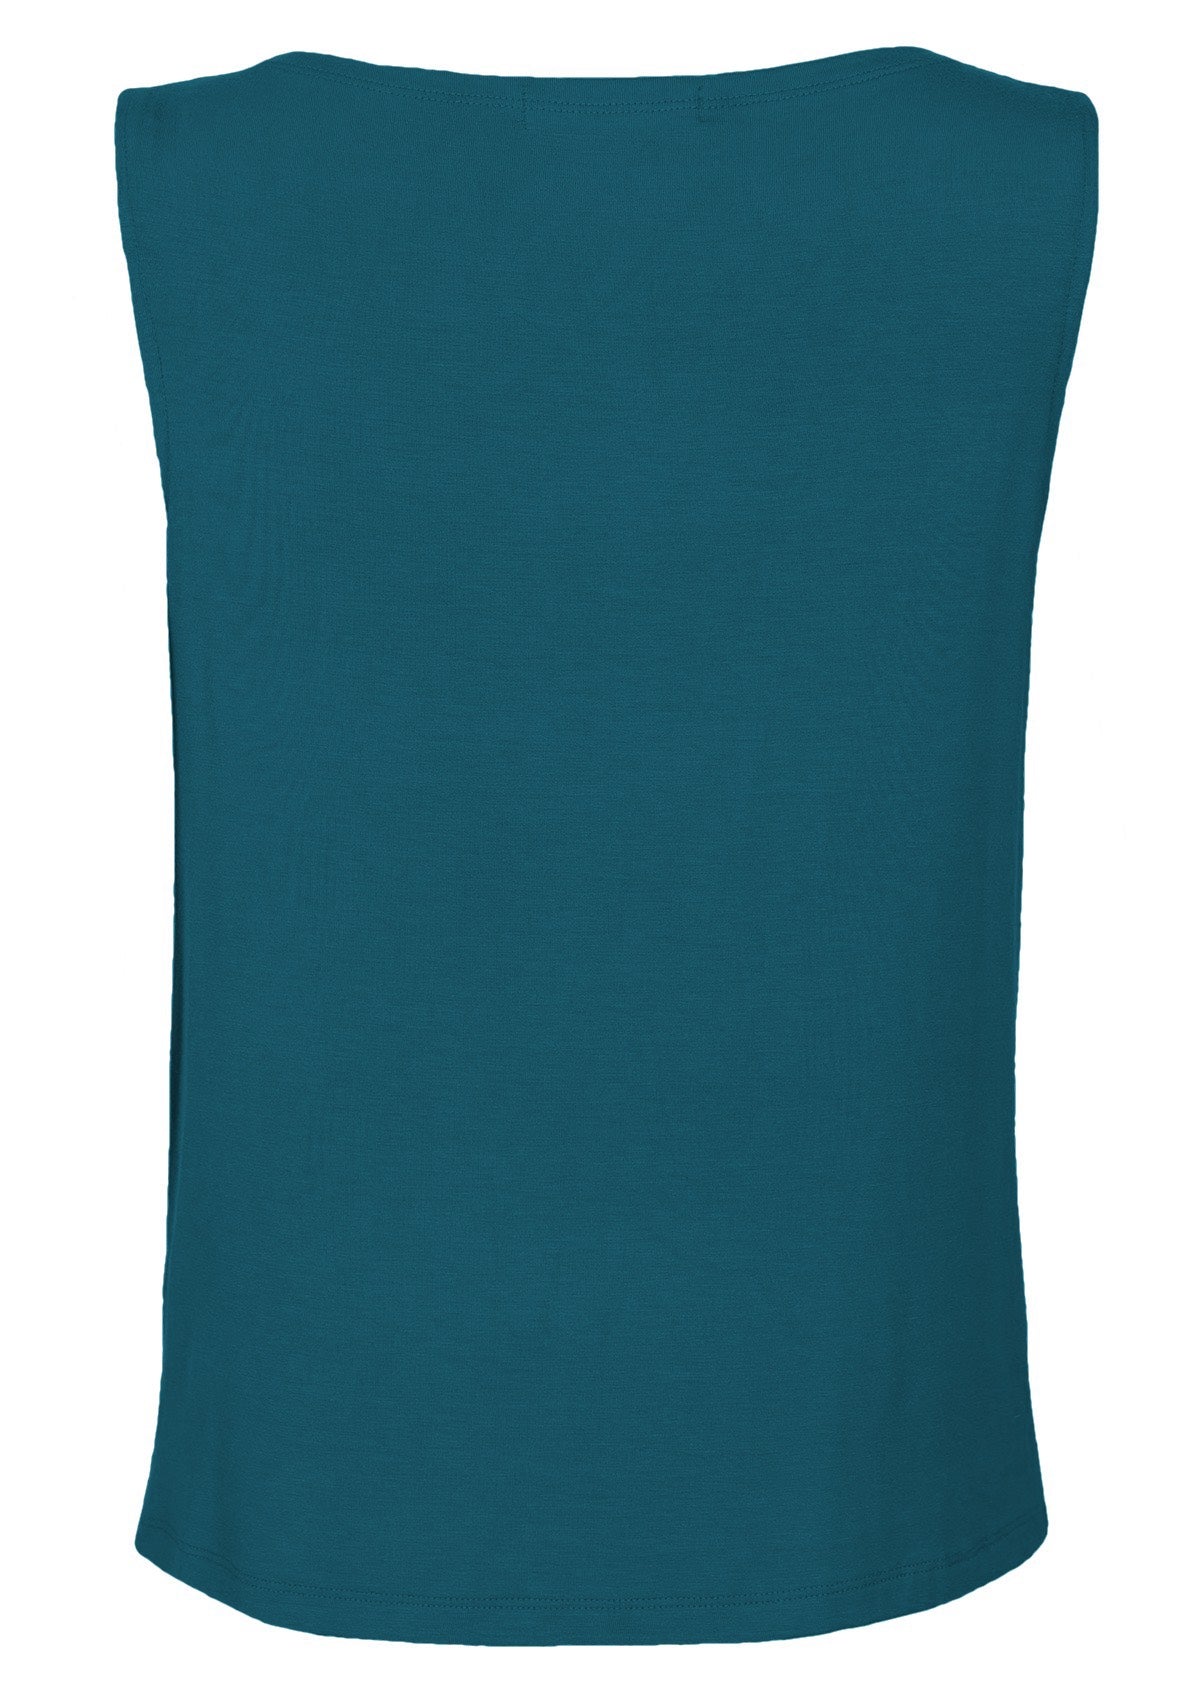 Back view relaxed fit teal blue singlet top